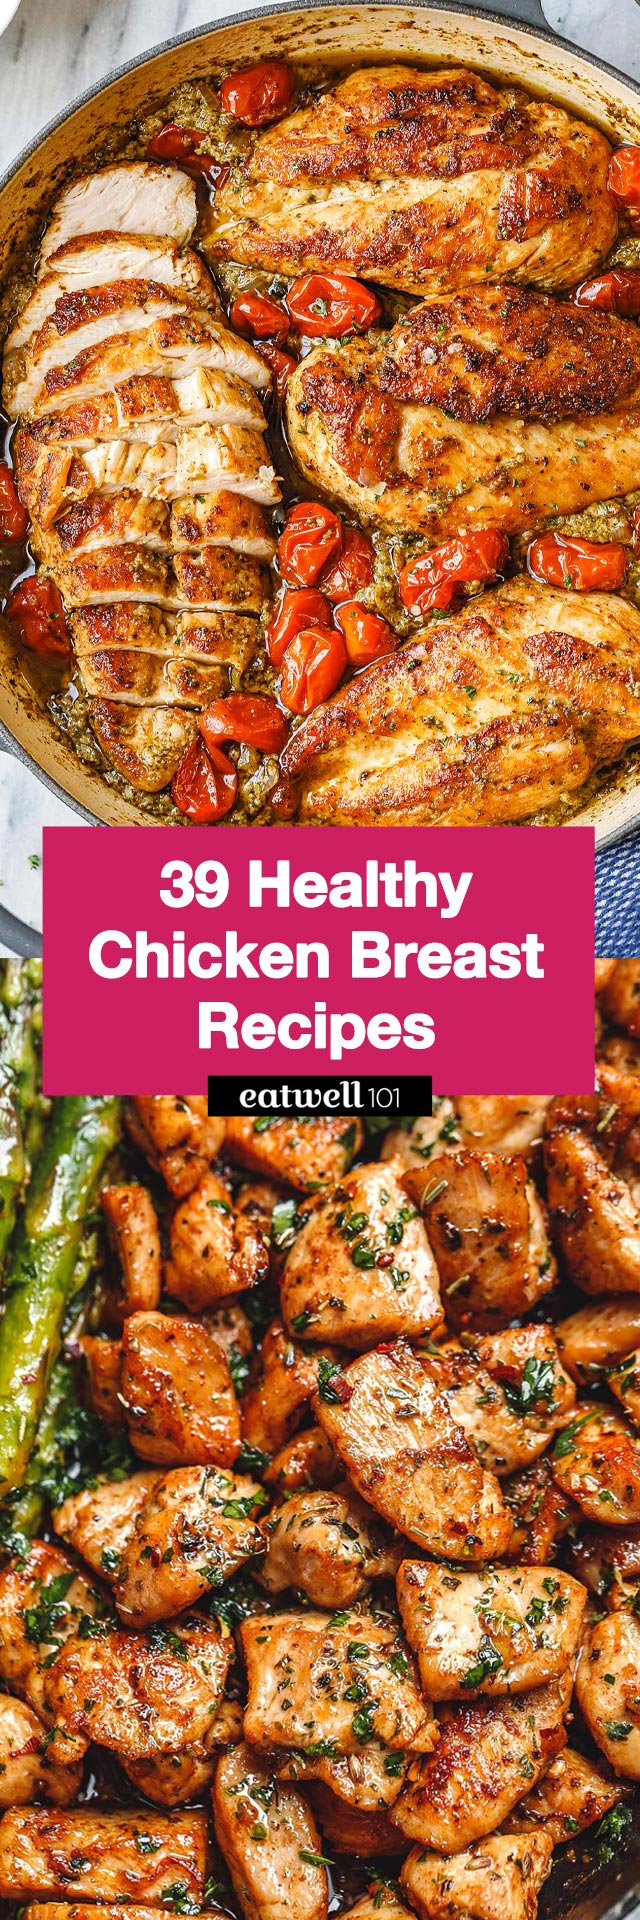 39 Healthy Chicken Breasts Recipes for Dinner - #chicken #recipes #eatwell101 - These easy and healthy chicken breast recipes are worth trying - They're so delicious and nourishing!